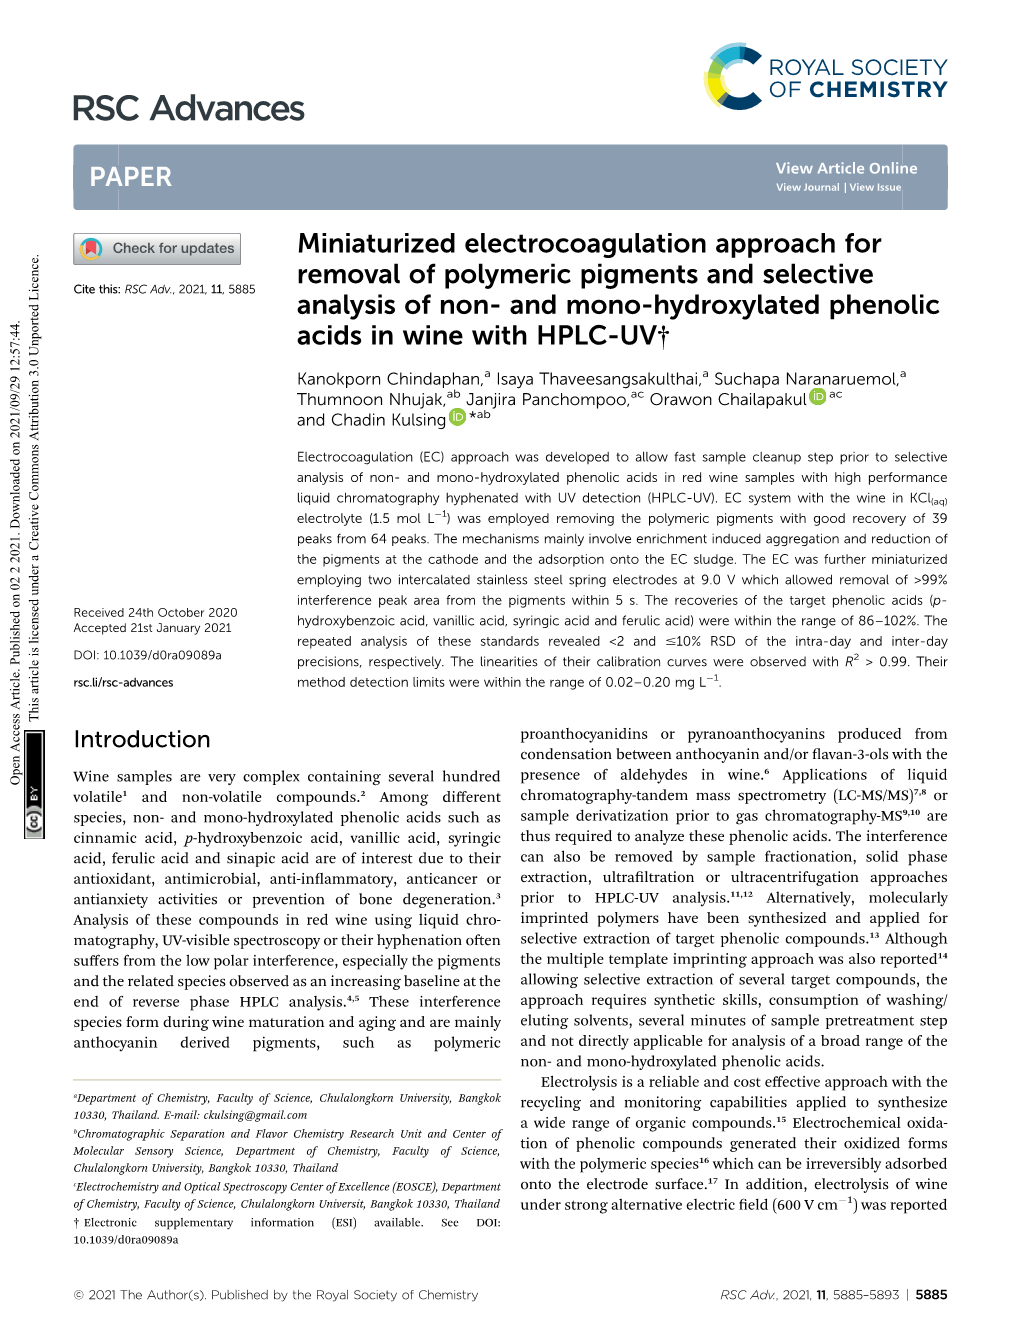 Miniaturized Electrocoagulation Approach For